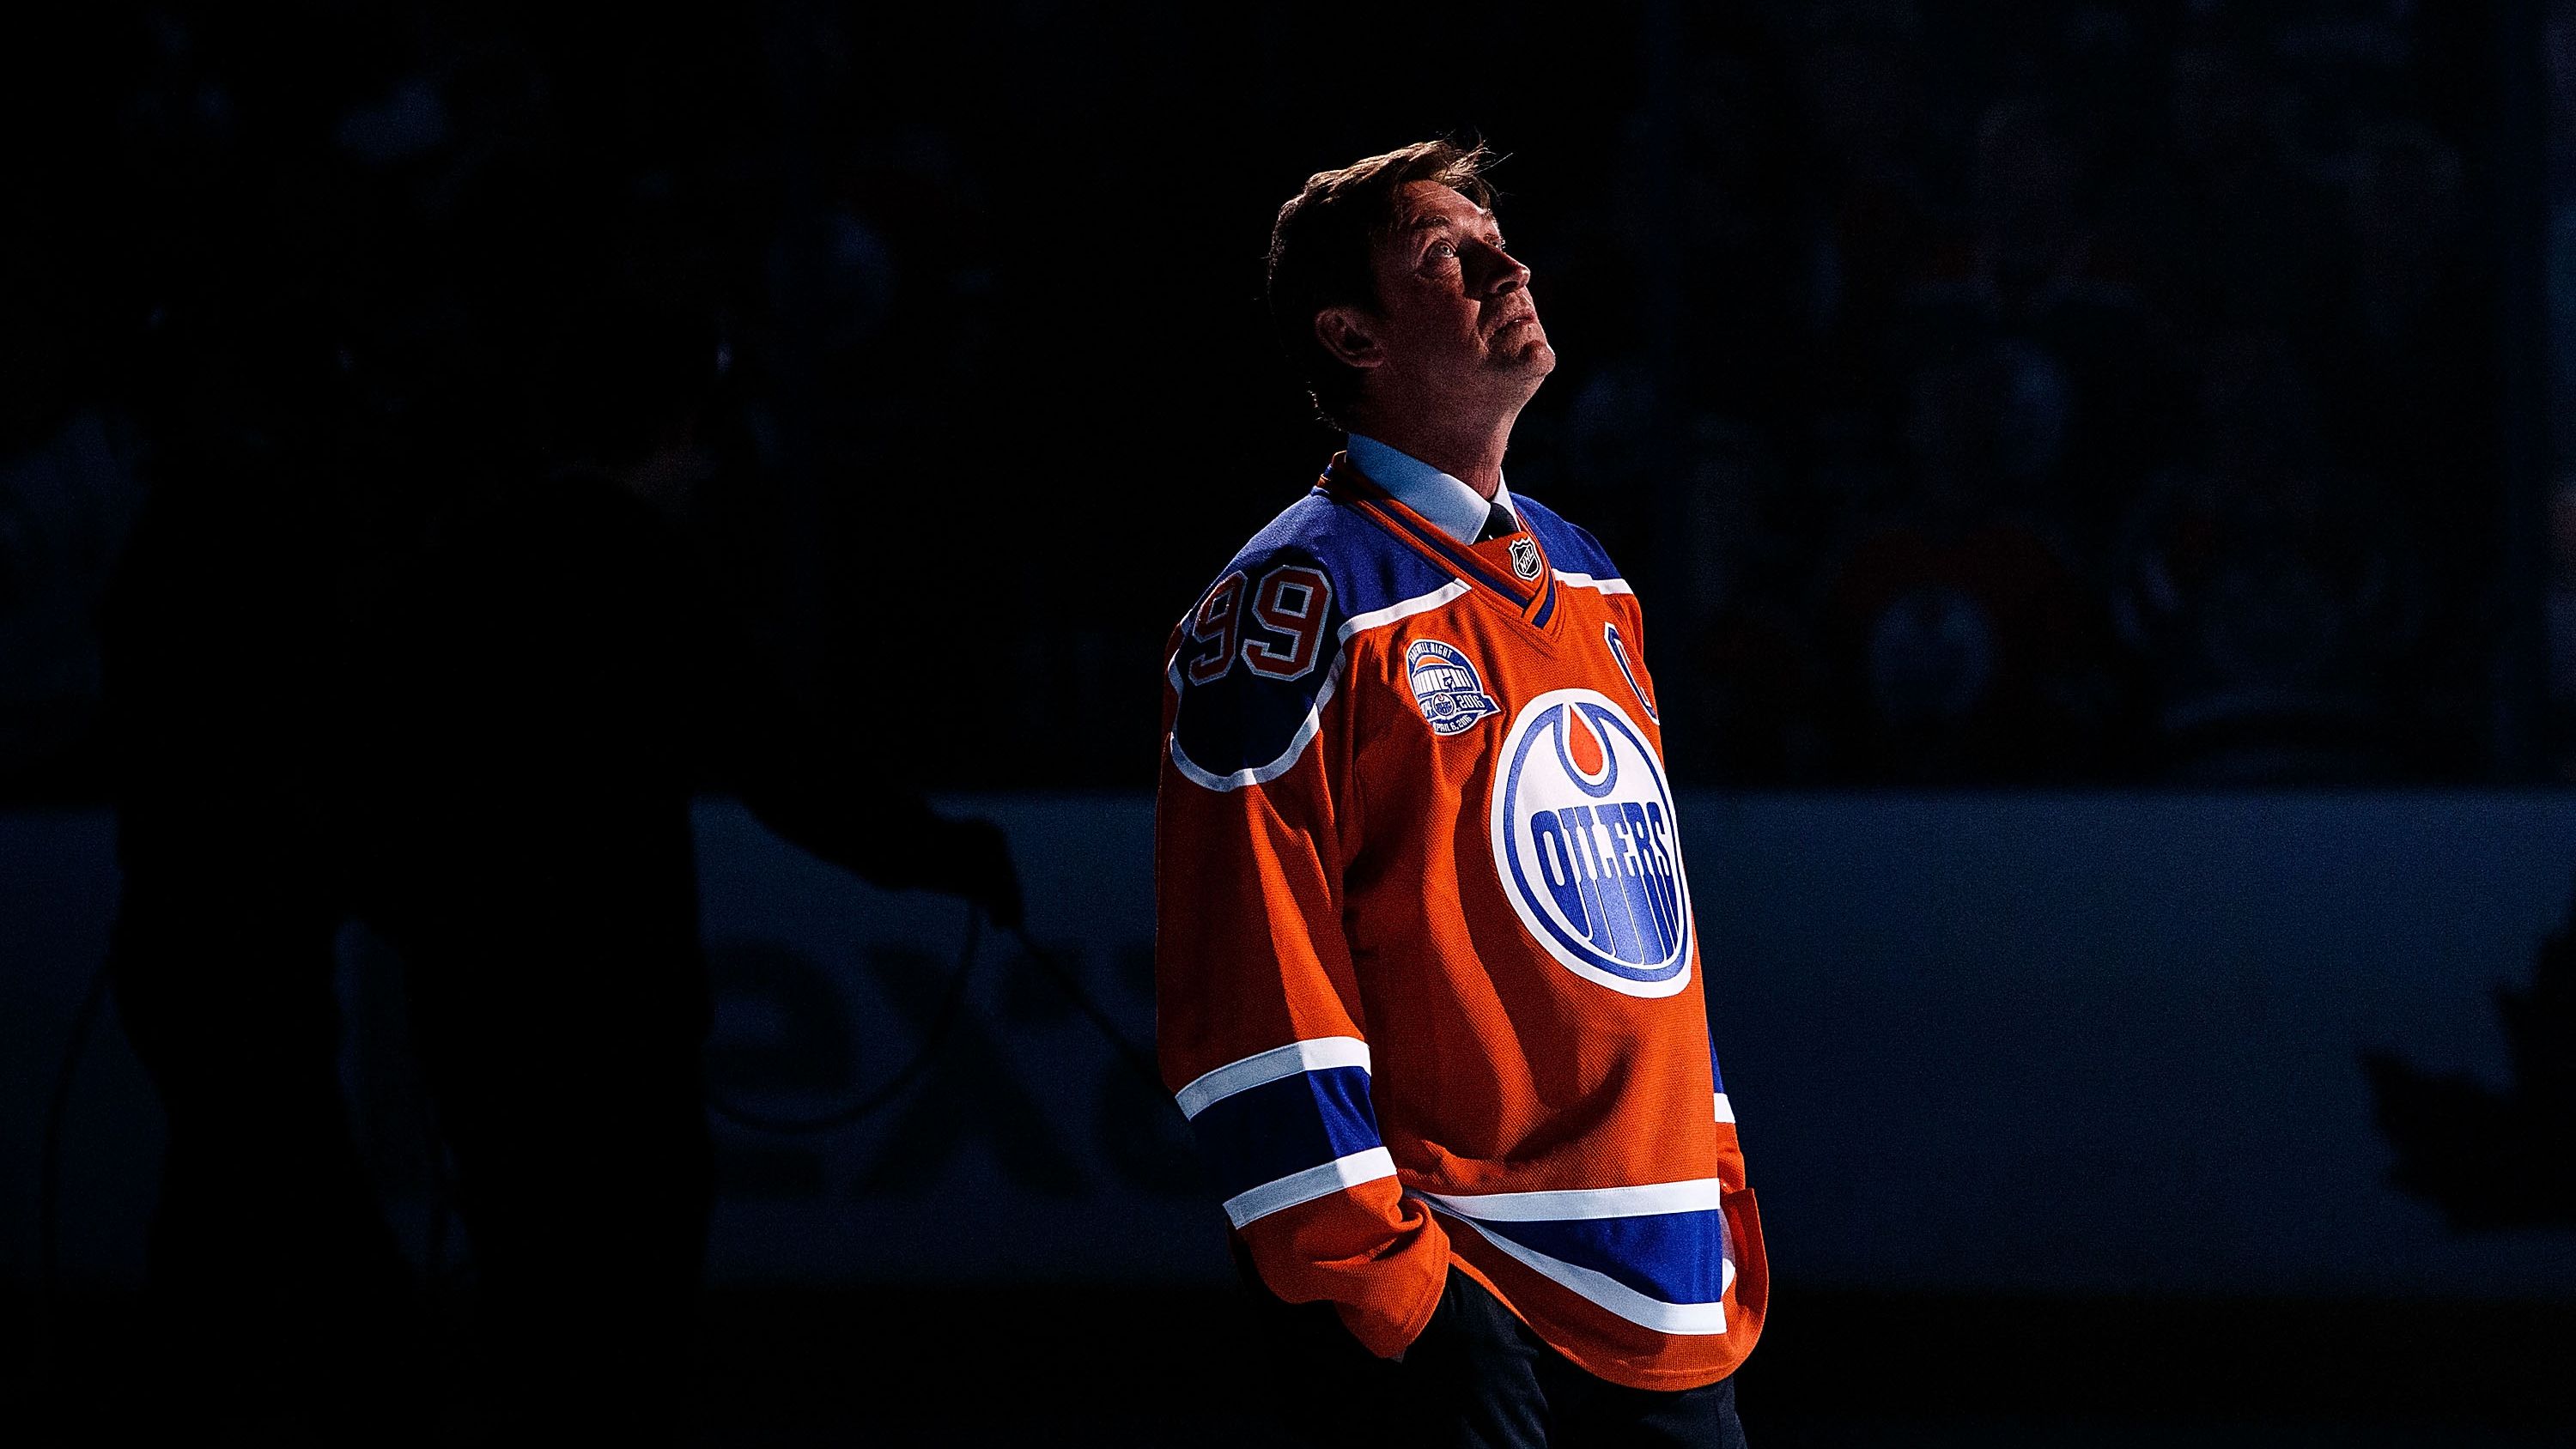 NHL - 55 shades of Great - Facts about Wayne Gretzky on his 55th birthday -  ESPN